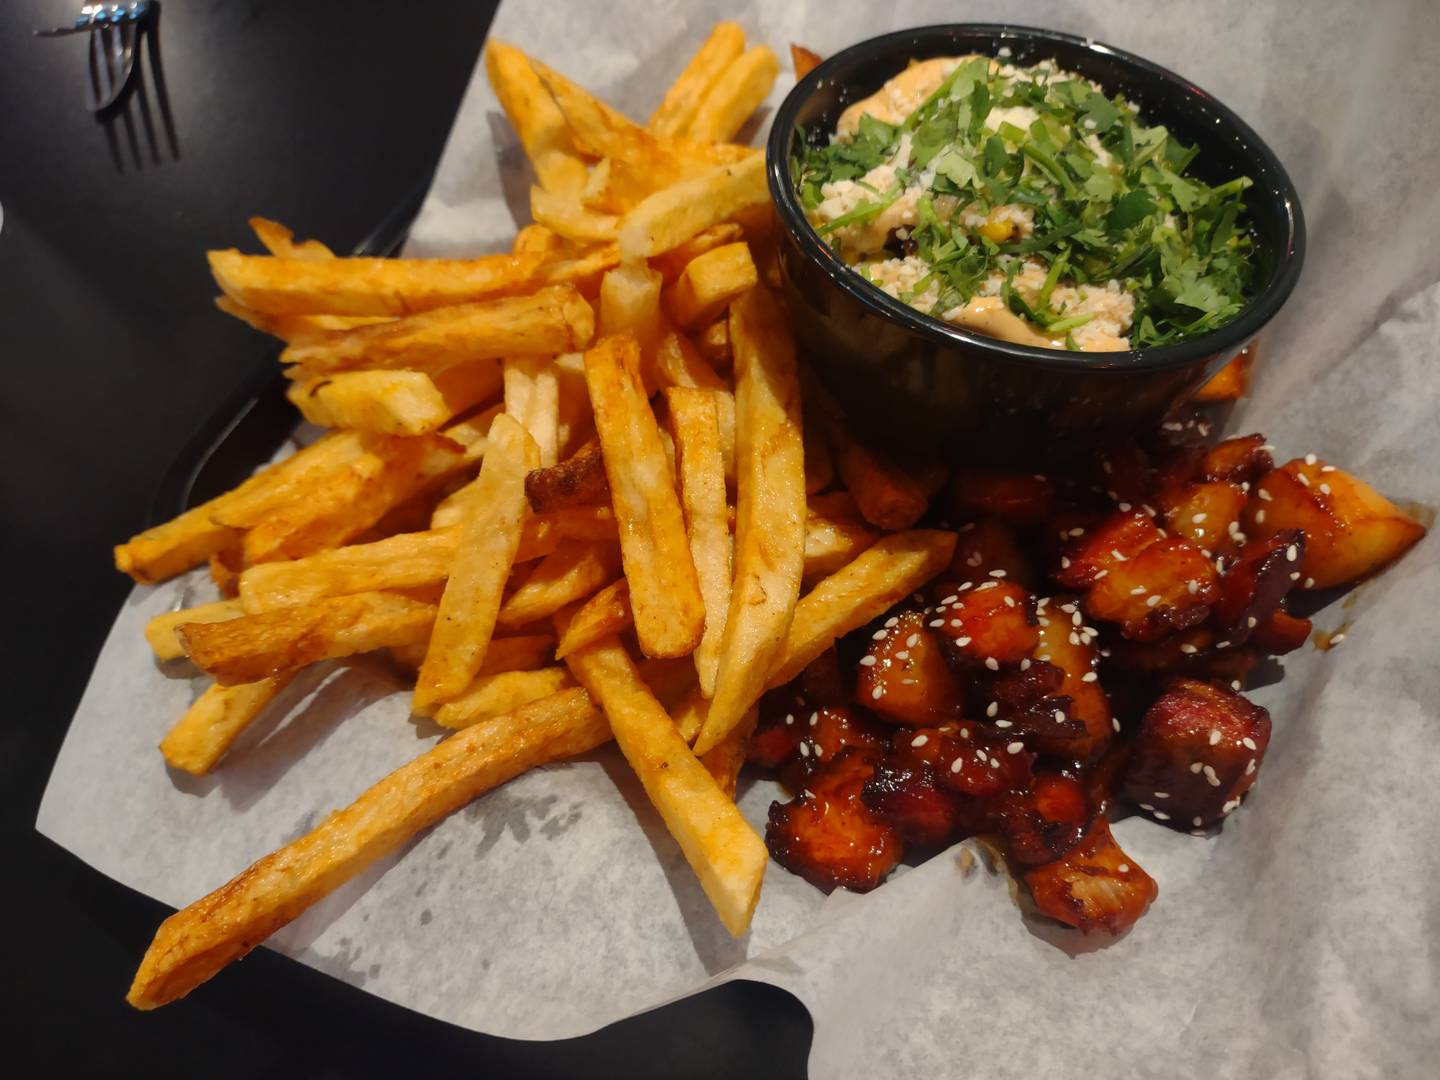 The sticky pork belly tossed with a side of sweet chili at Brennan's Bar and Grill in Oglesby is served with two sides. In this case, hand cut fries and a dish of street corn.